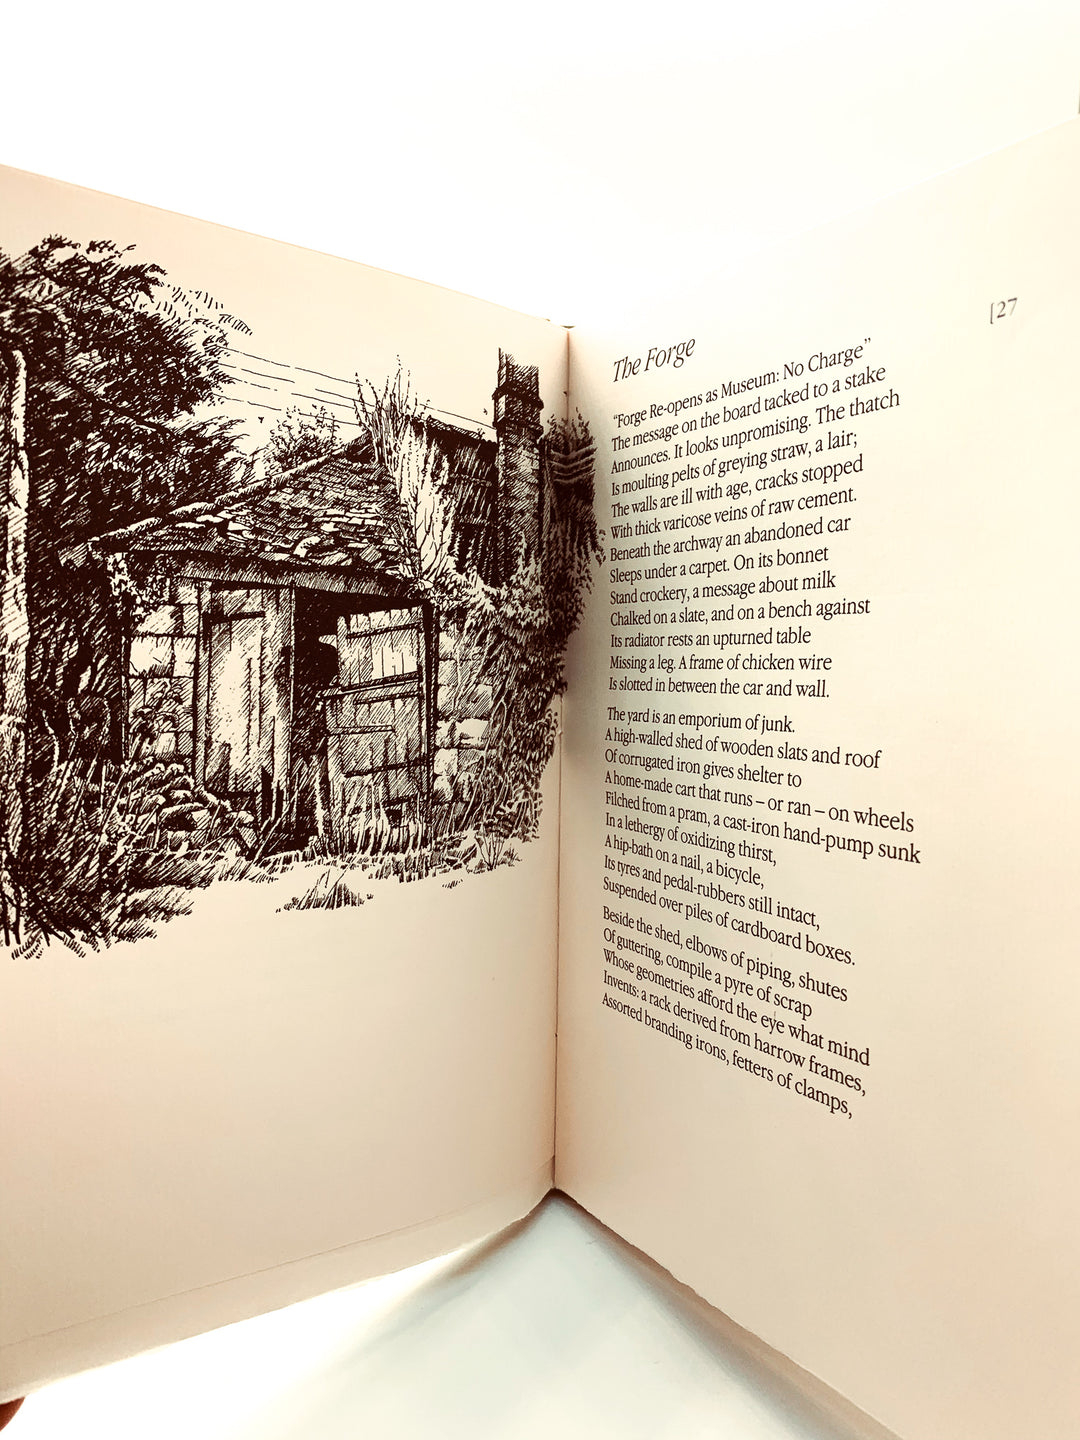 Rae, Simon - Listening to the Lake : Poems and Drawings from Garsington & Great Tew - SIGNED | image4